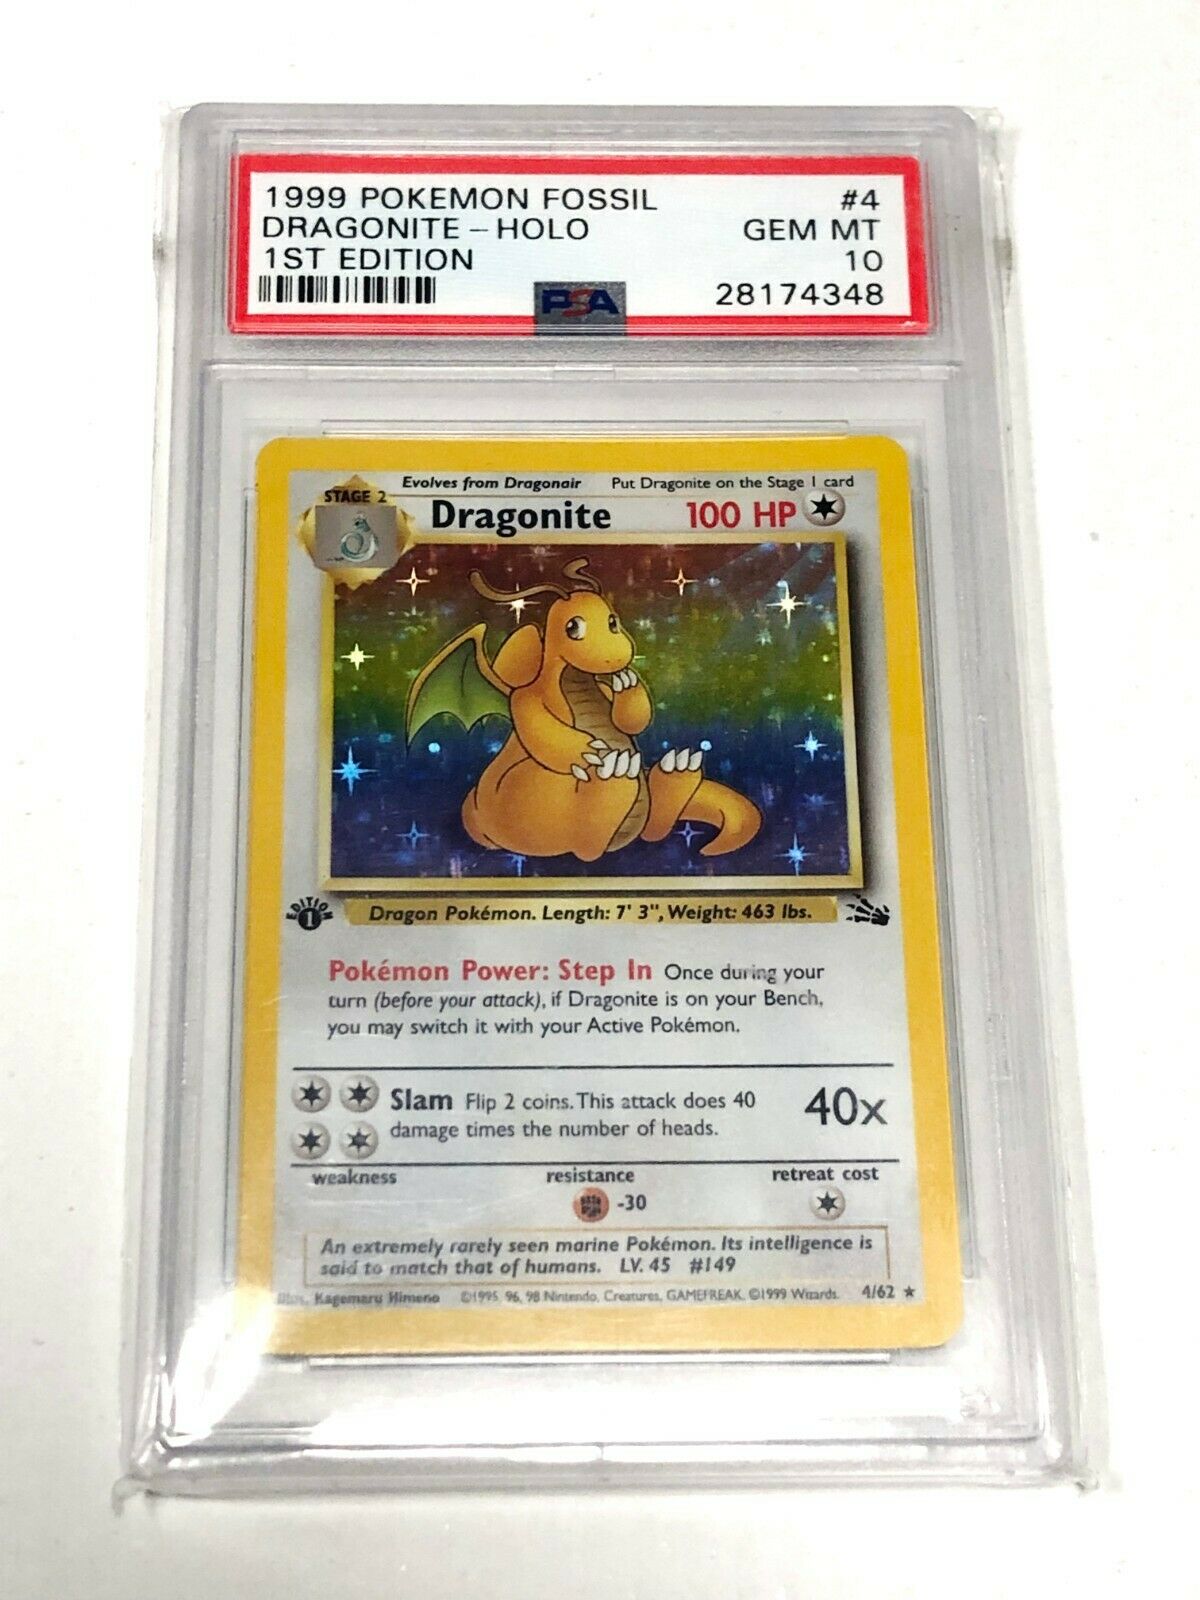 1999 Pokemon Fossil Dragonite 1st First Edition PSA 10 Card Holo GEM MINT